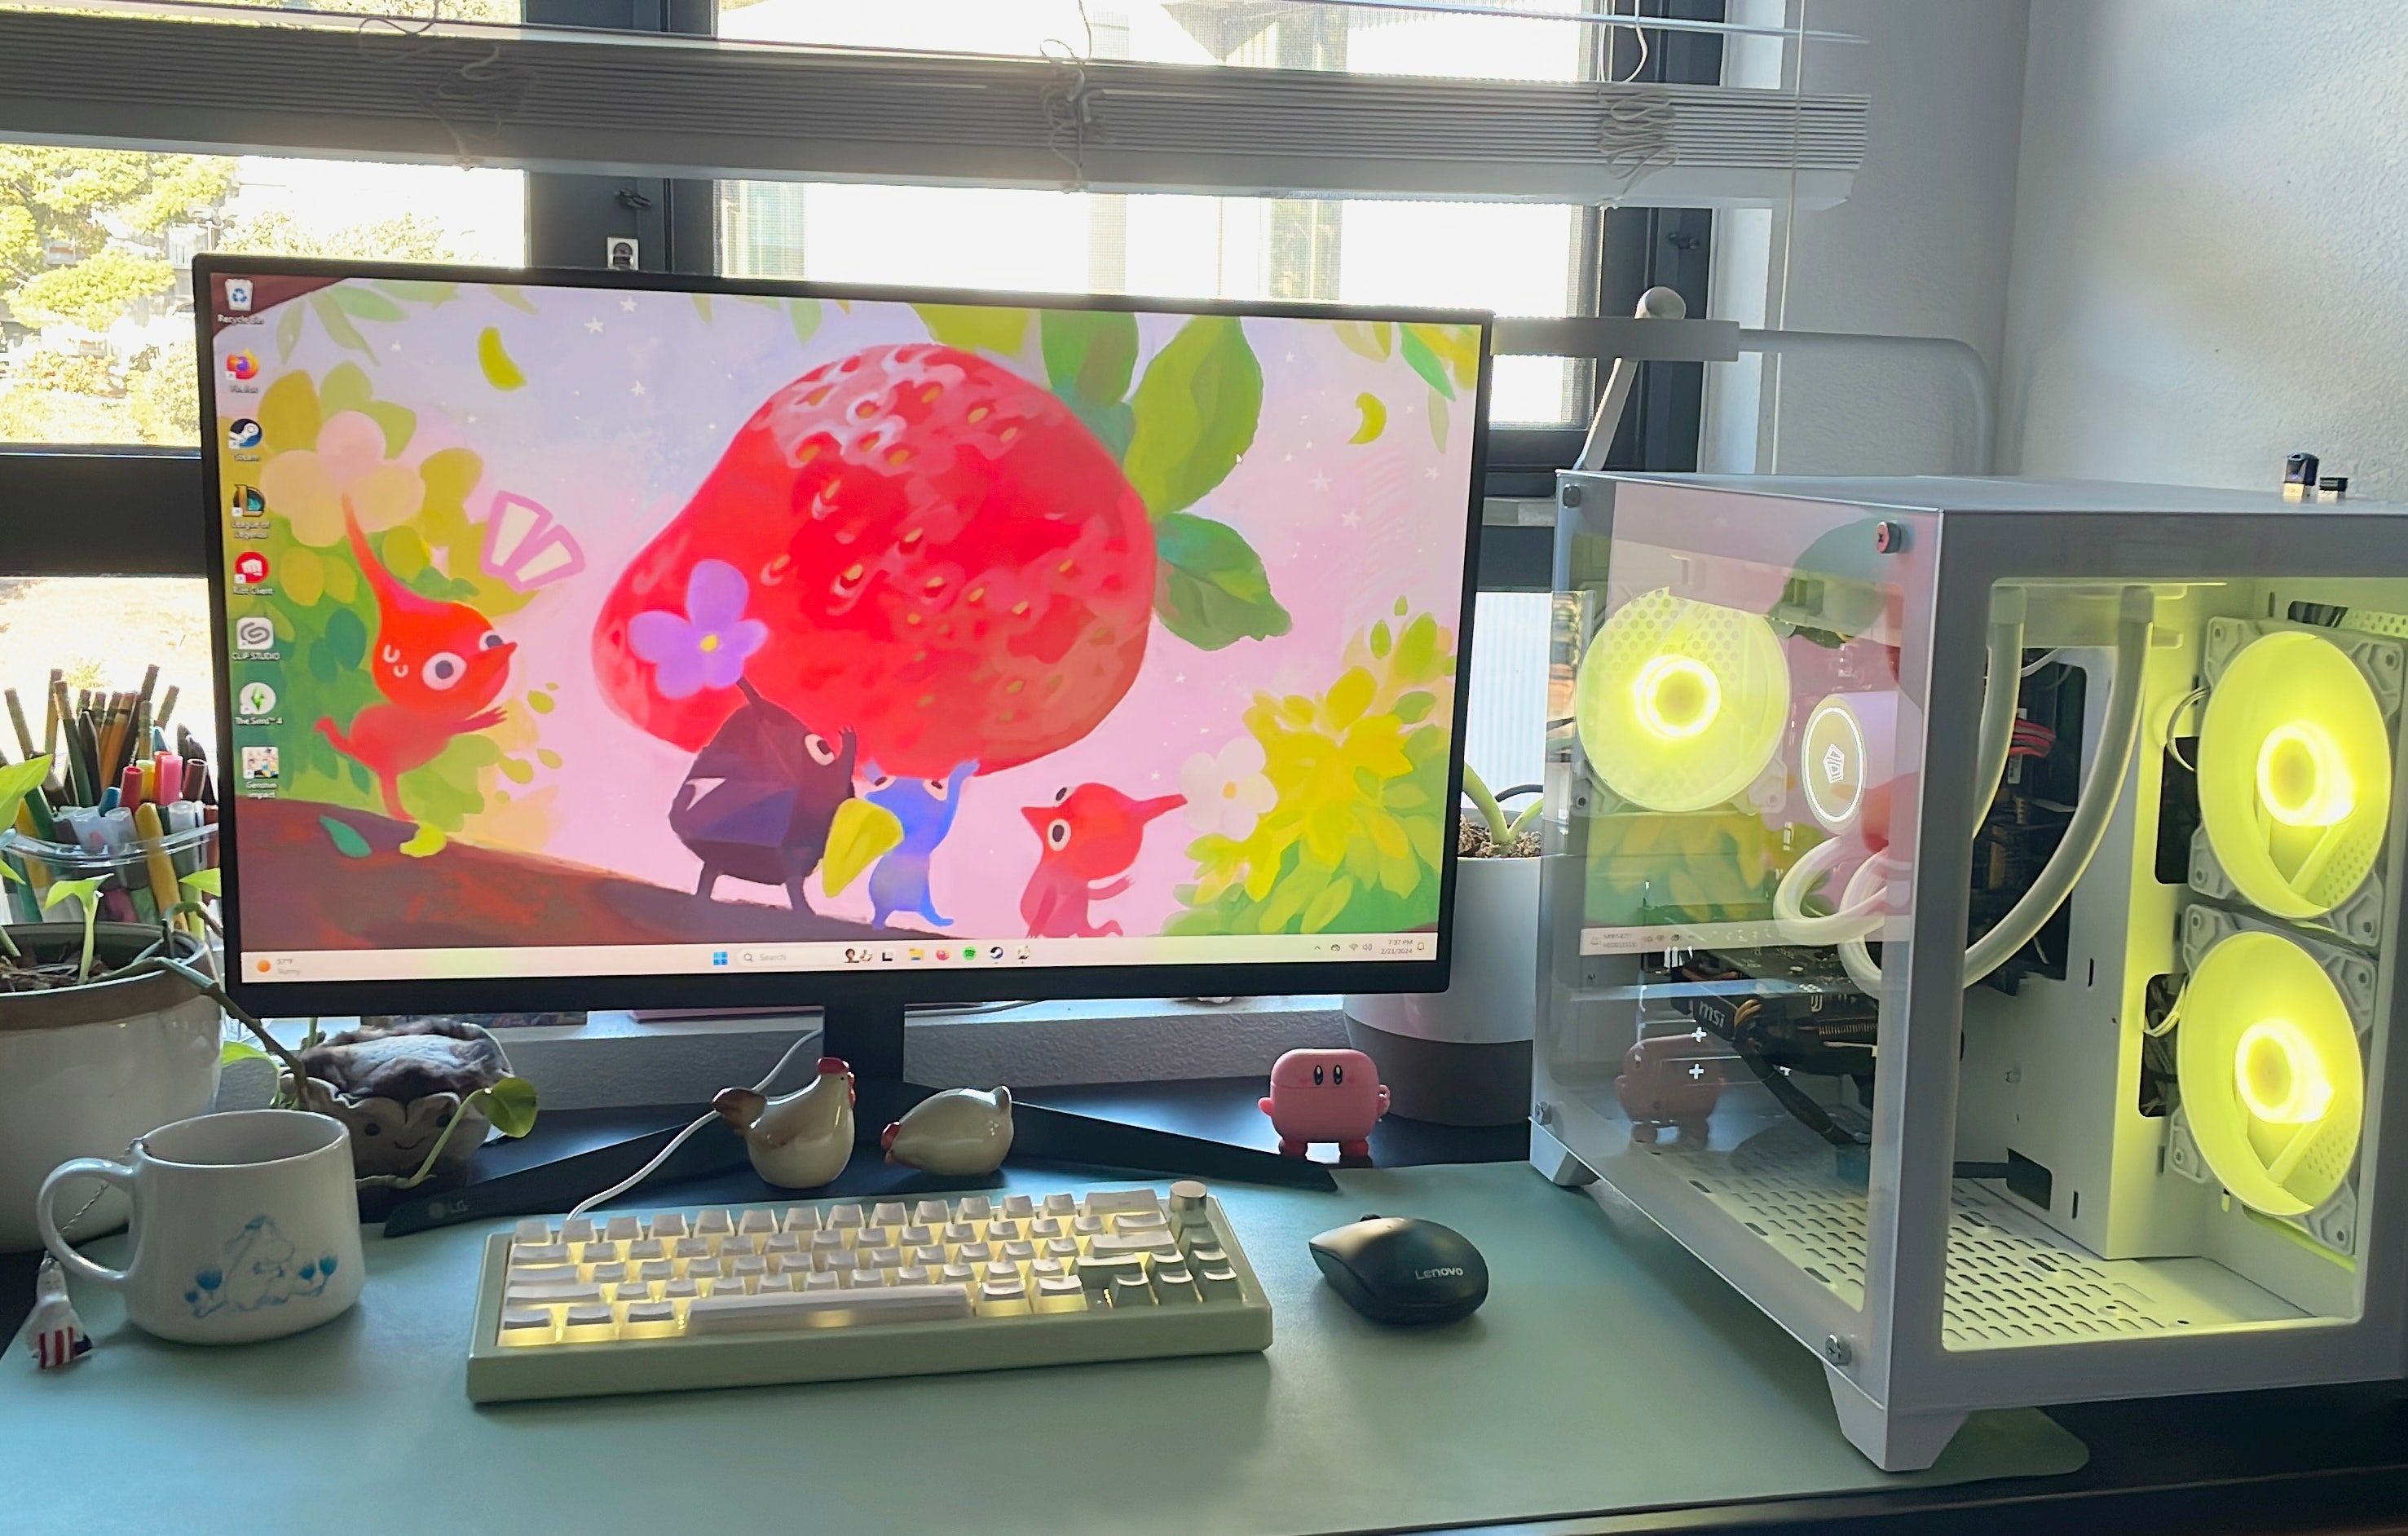 A PC setup. It includes a monitor with a background of Pikmin carrying a strawberry, a green keyboard, a black mouse, and the PC itself, which has two clear glass sides and fans with yellow light.